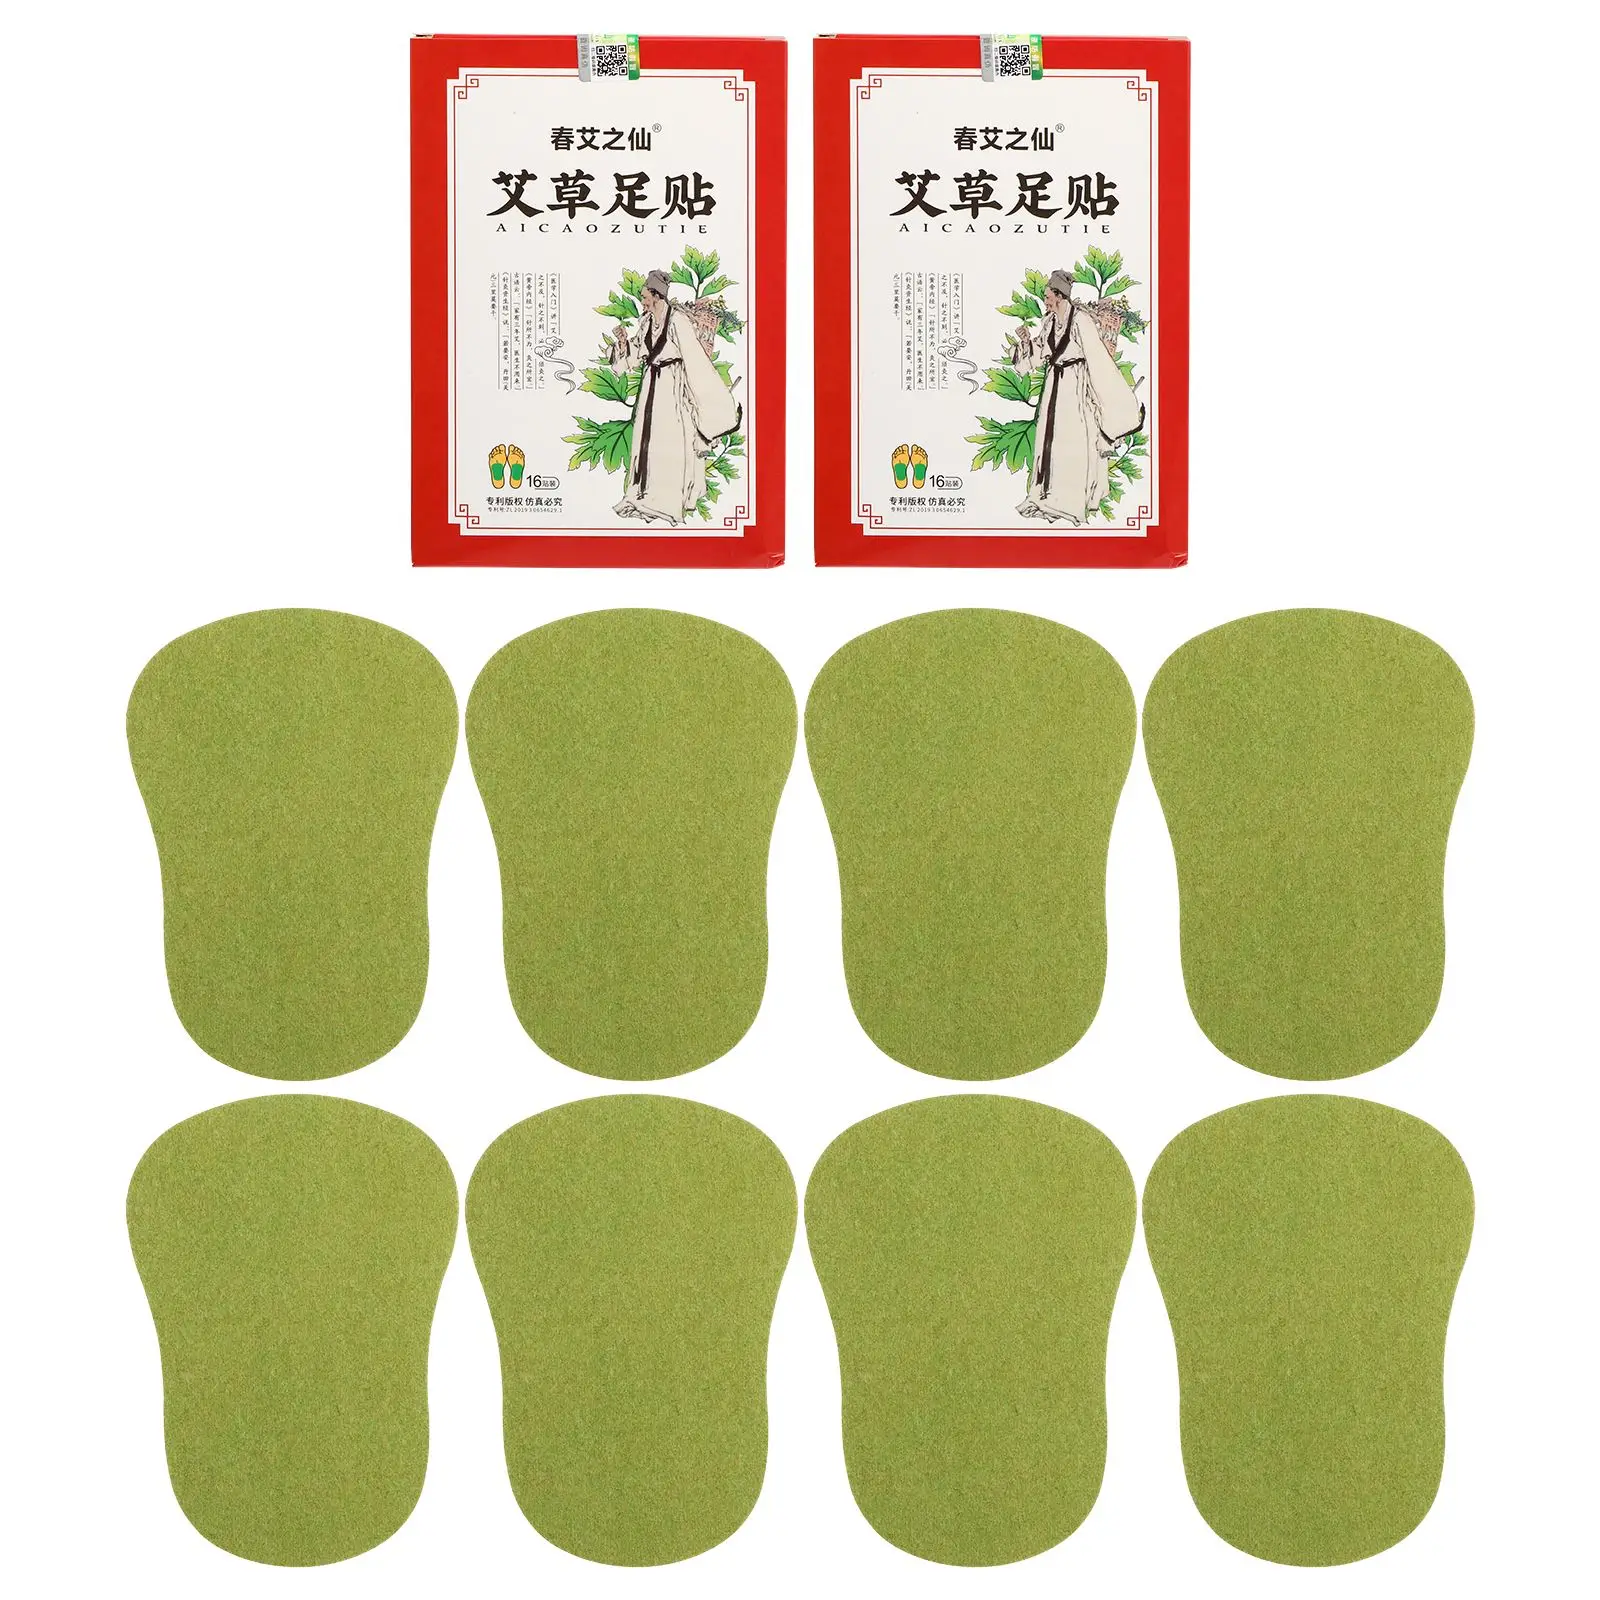 32pcs Natural Herbal Wormwood Artemisia Argyi Detox Foot Care Patche Pad Relieve Stress Help Sleeping Warm Foot Pad Patch help